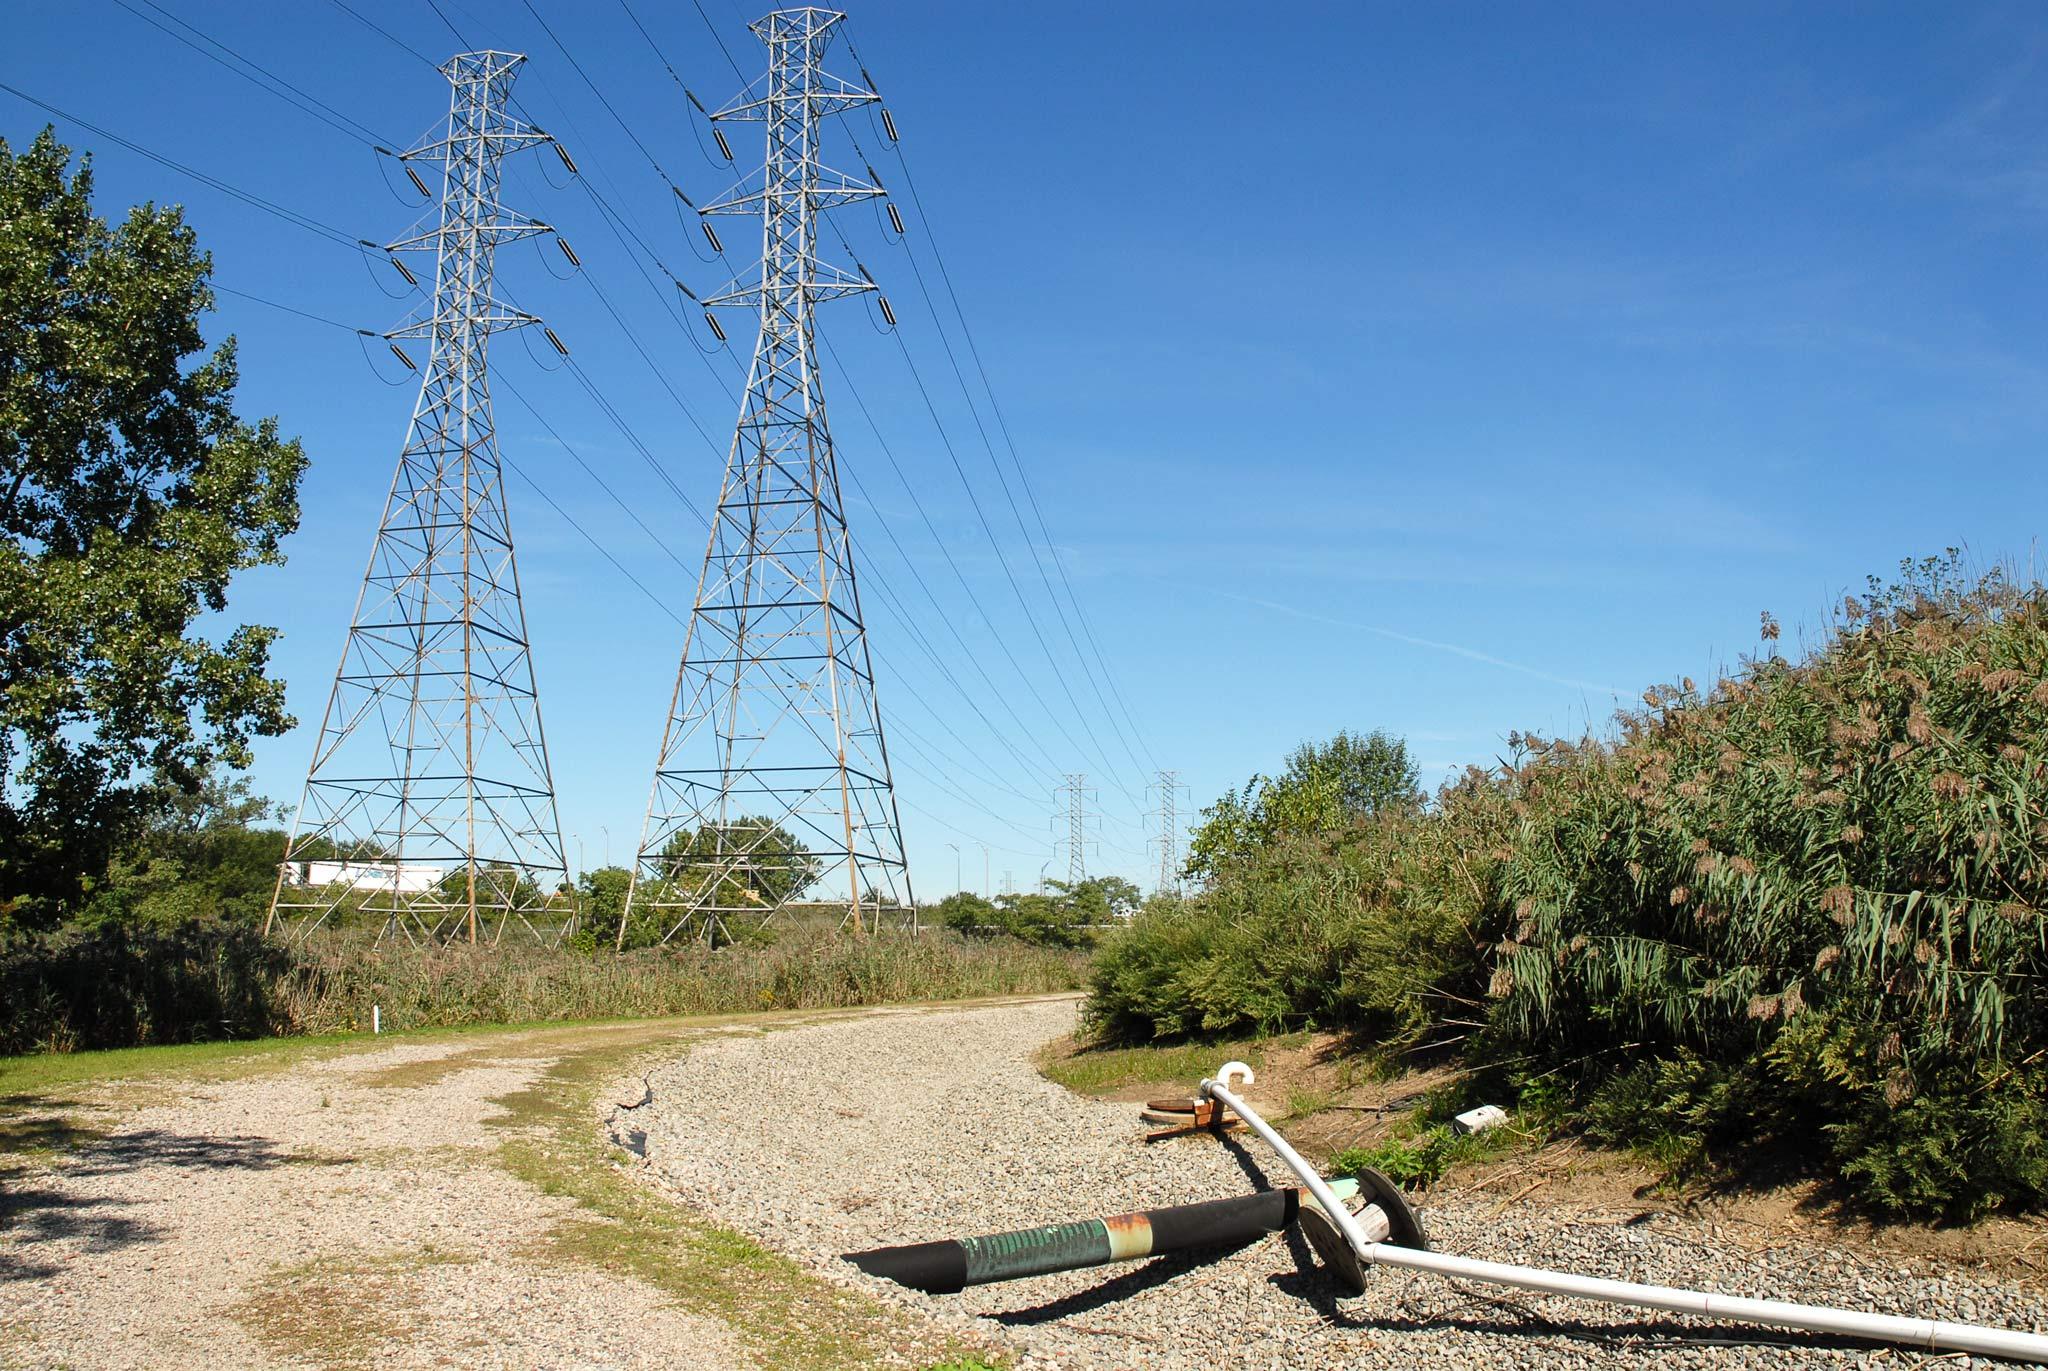 A gravel road with two tall electricity towers in the background